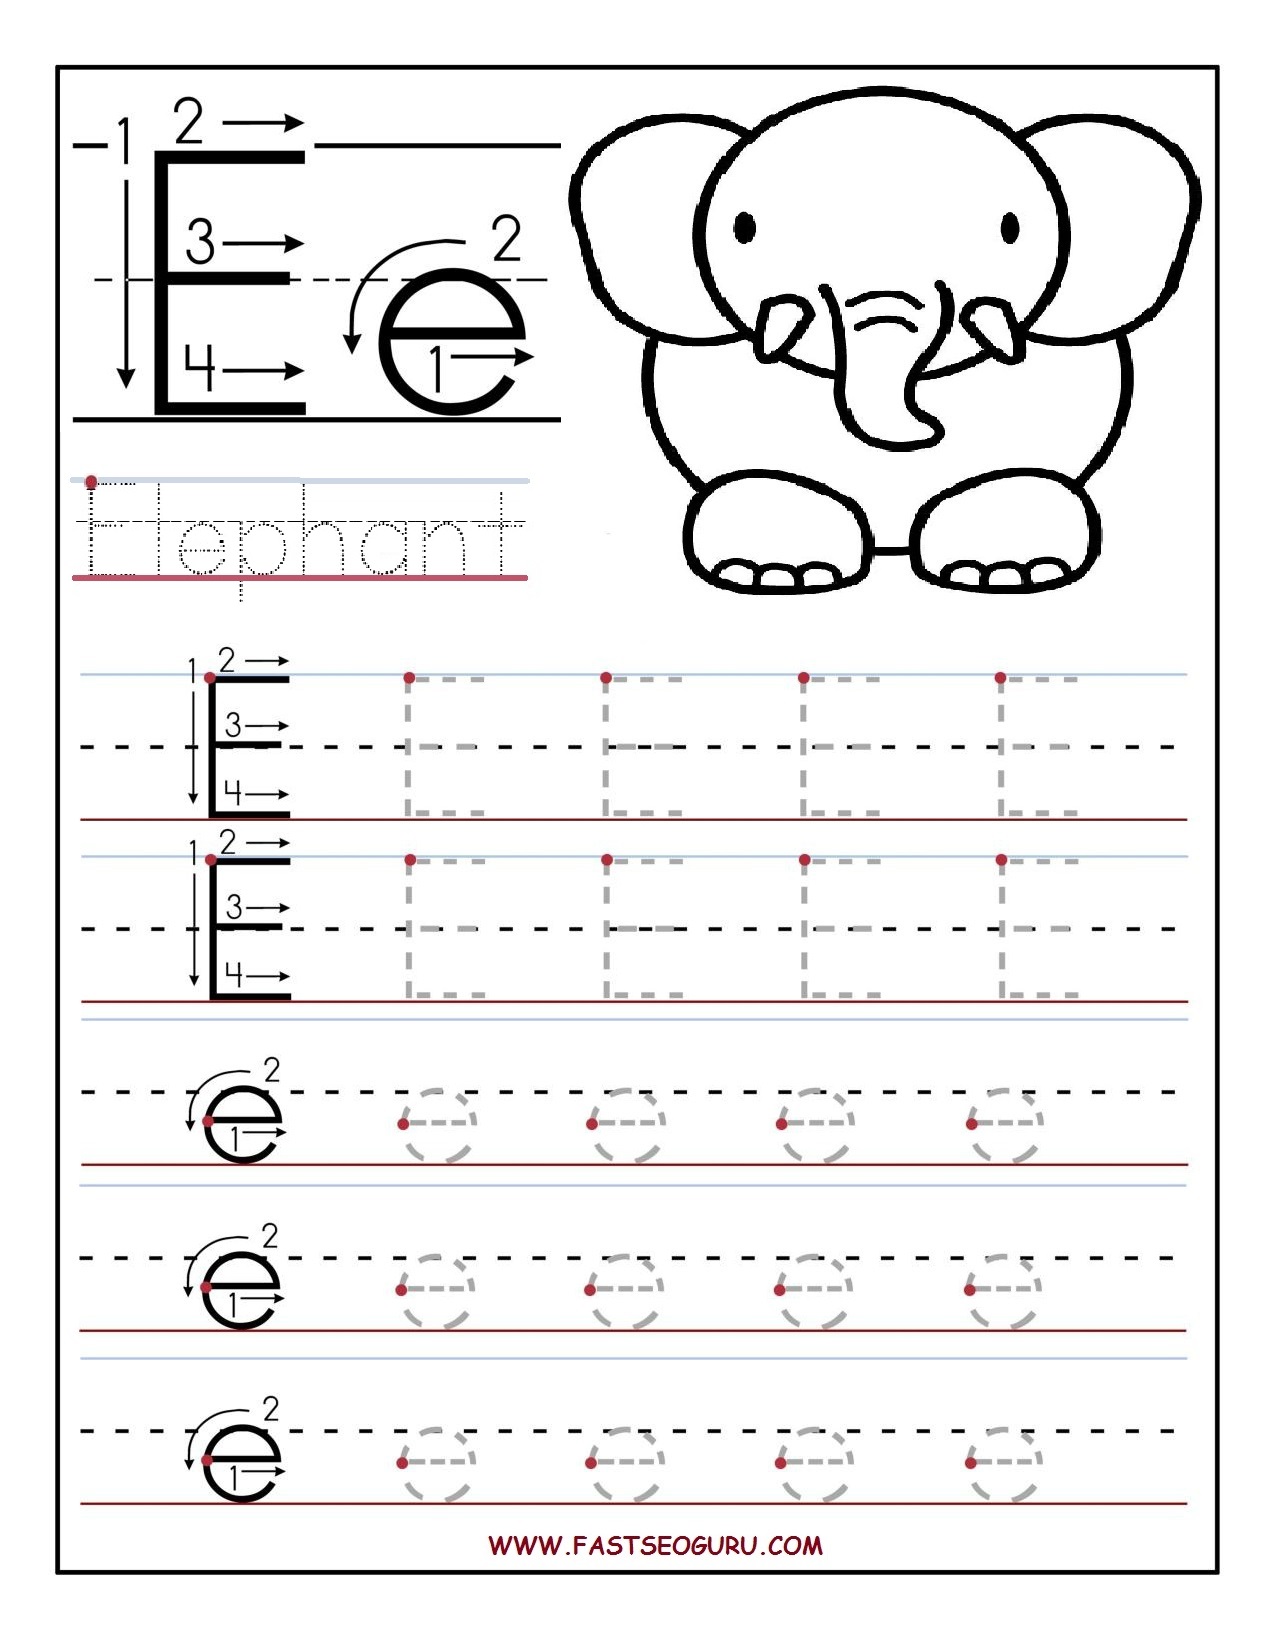 Printable Letter E Tracing Worksheets For Preschool Alphabet Tracing The Letter E By Simply 